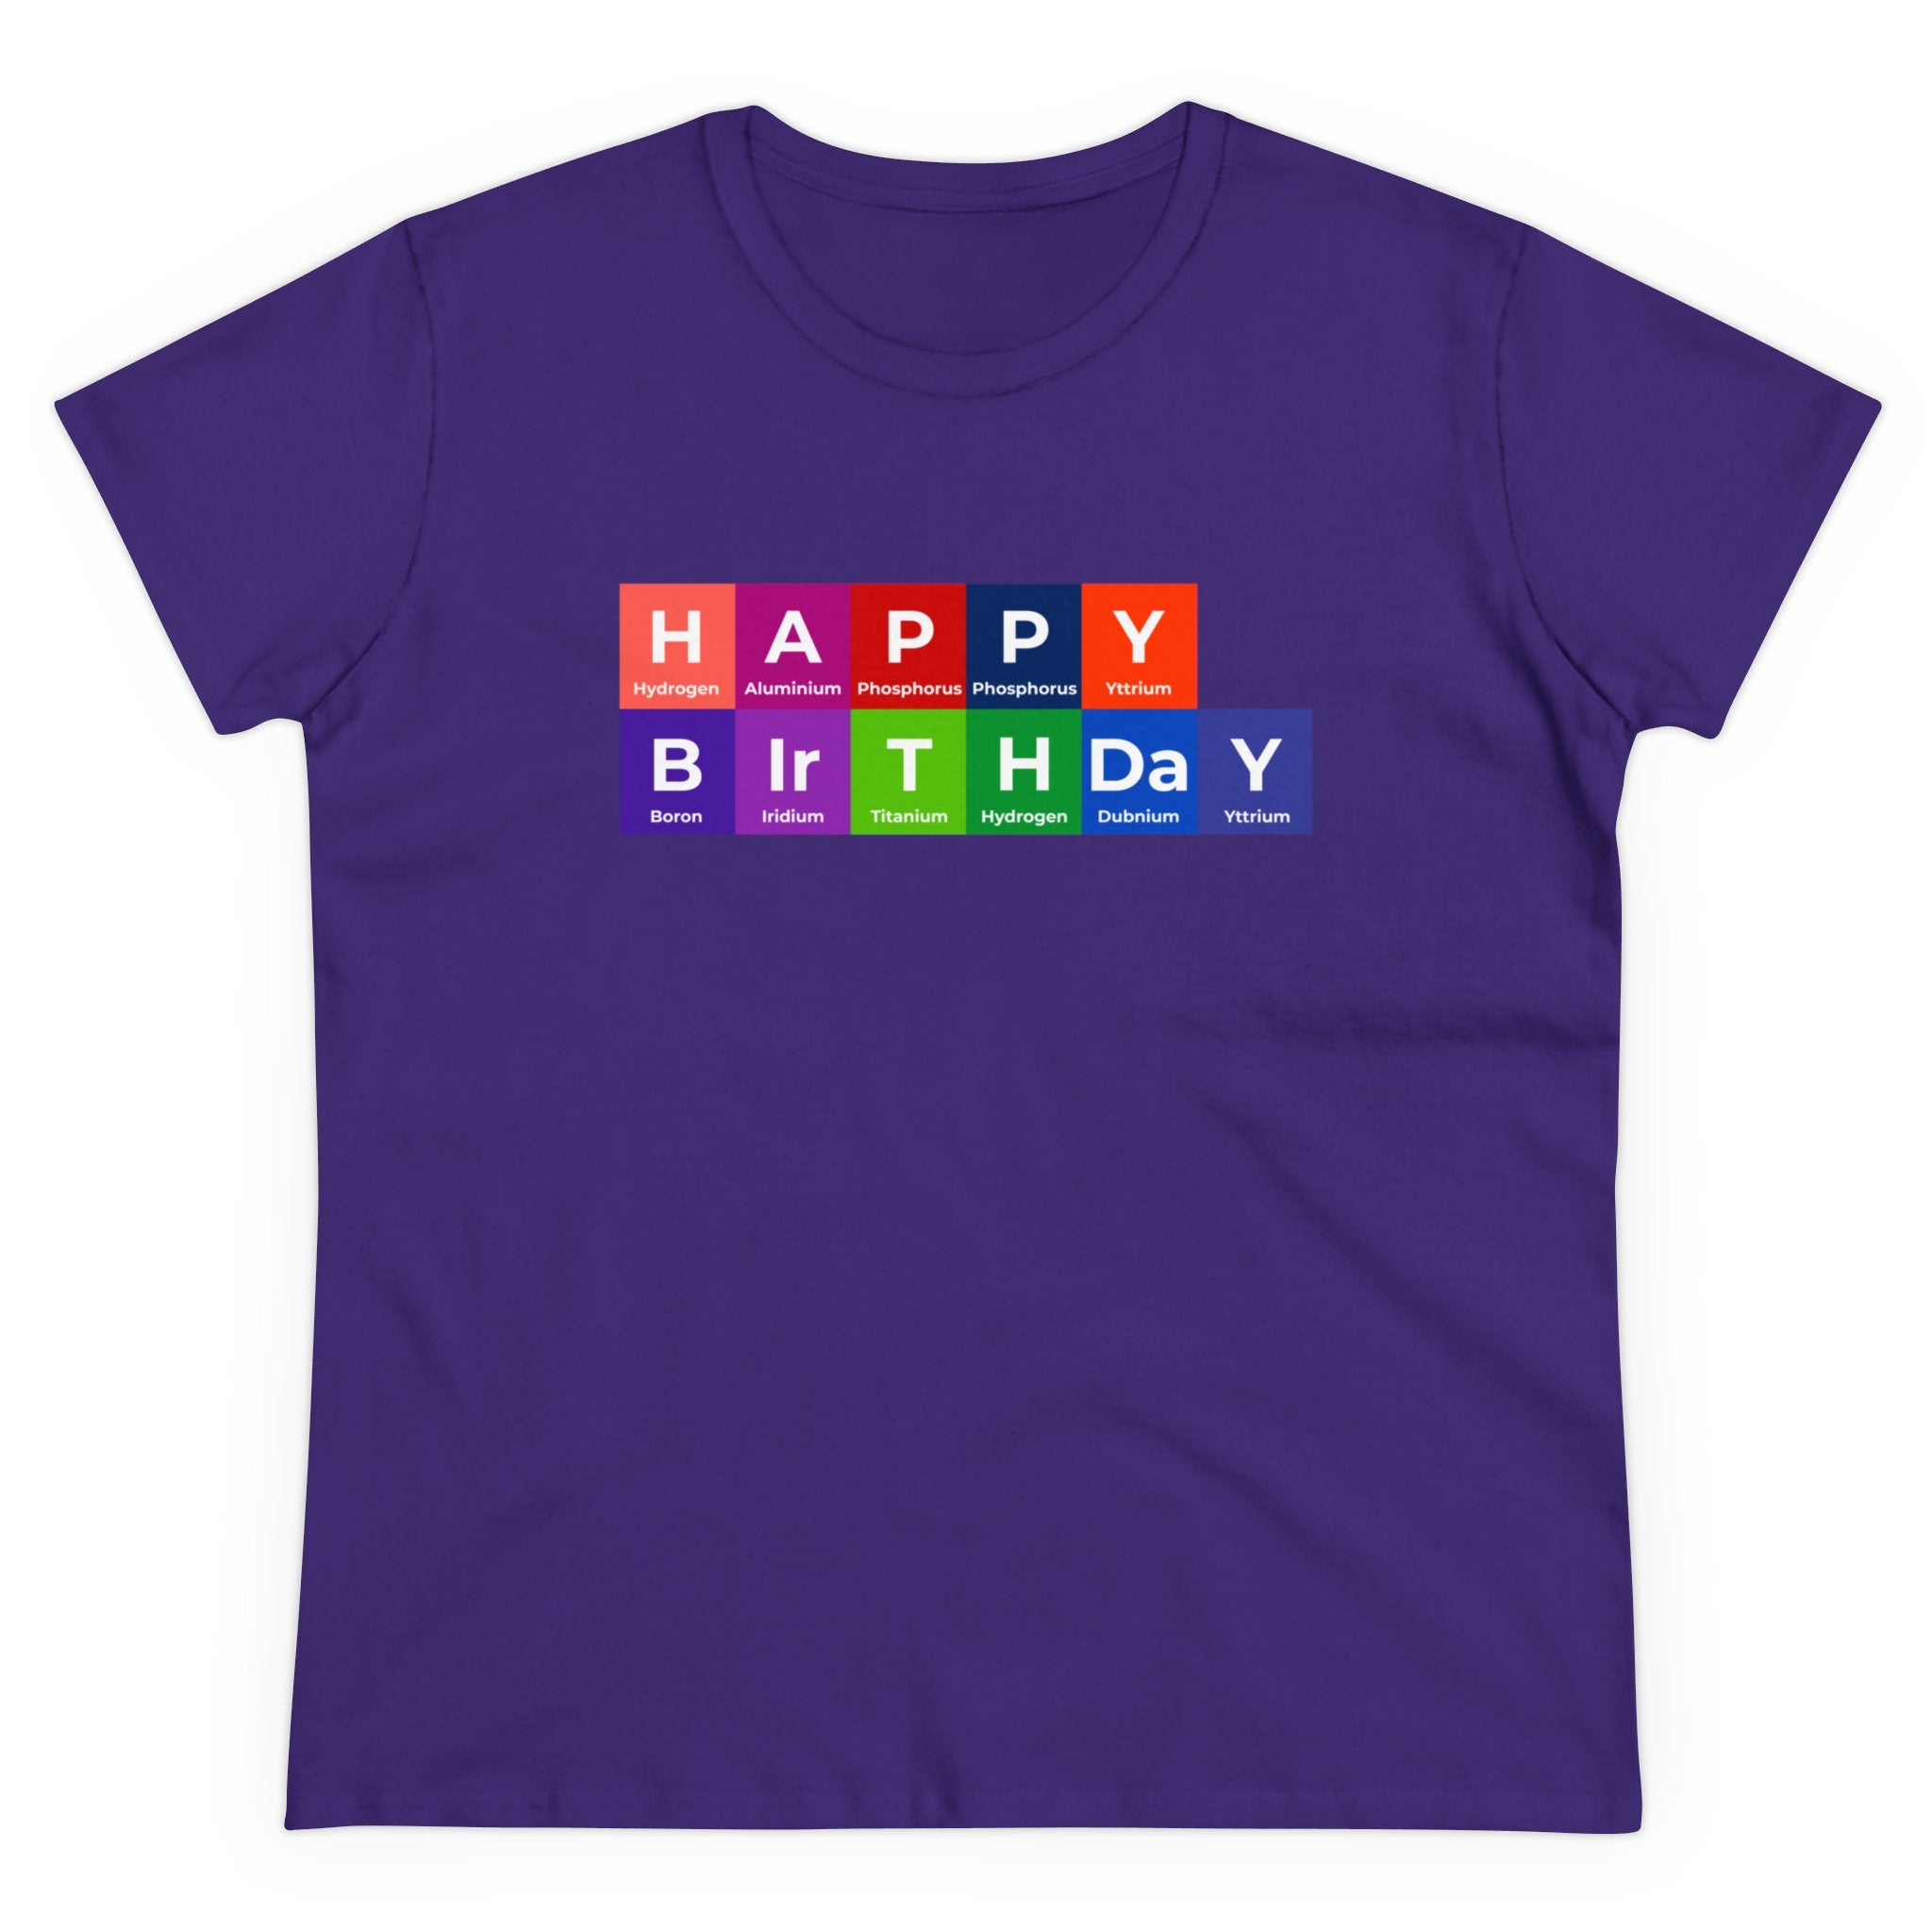 Happy Birthday - Women's Tee in purple displaying the phrase "Happy Birthday" with colorful periodic table element symbols, perfect for adding a touch of festivity and comfort to any celebration.